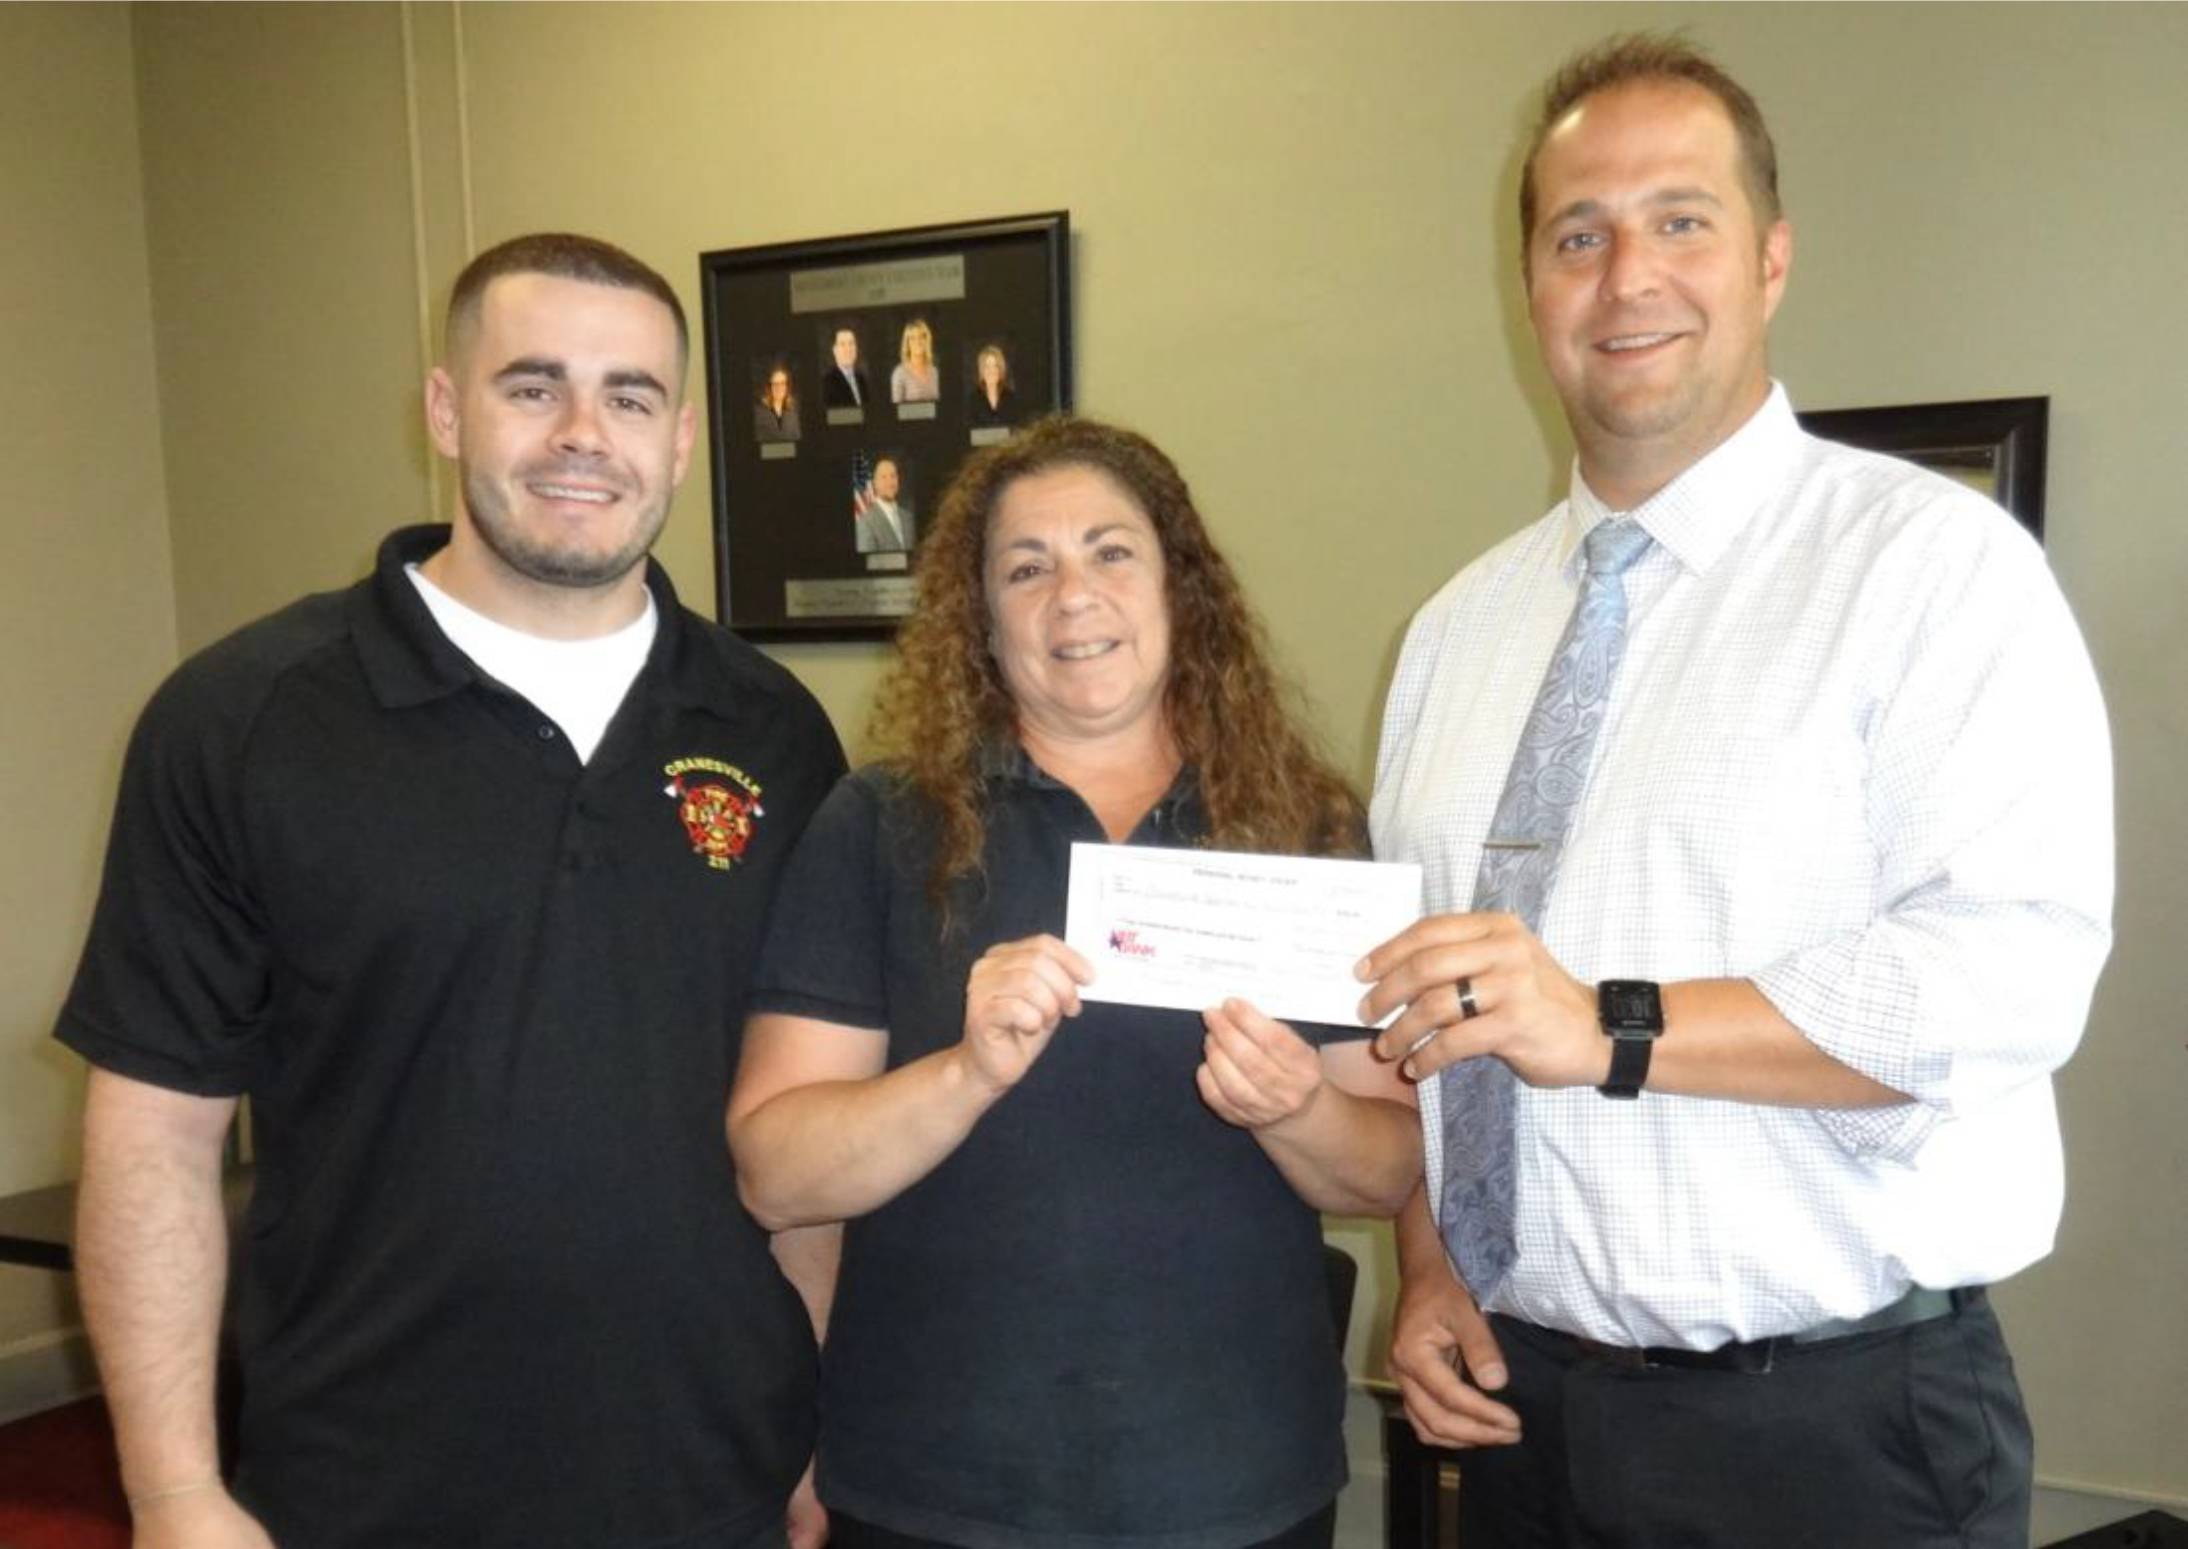 County Executive Matthew L. Ossenfort (right) presents a check to Cranesville Volunteer Fire Department's Joseph Sawyer and President/Firefighter Marilyn Sawyer.